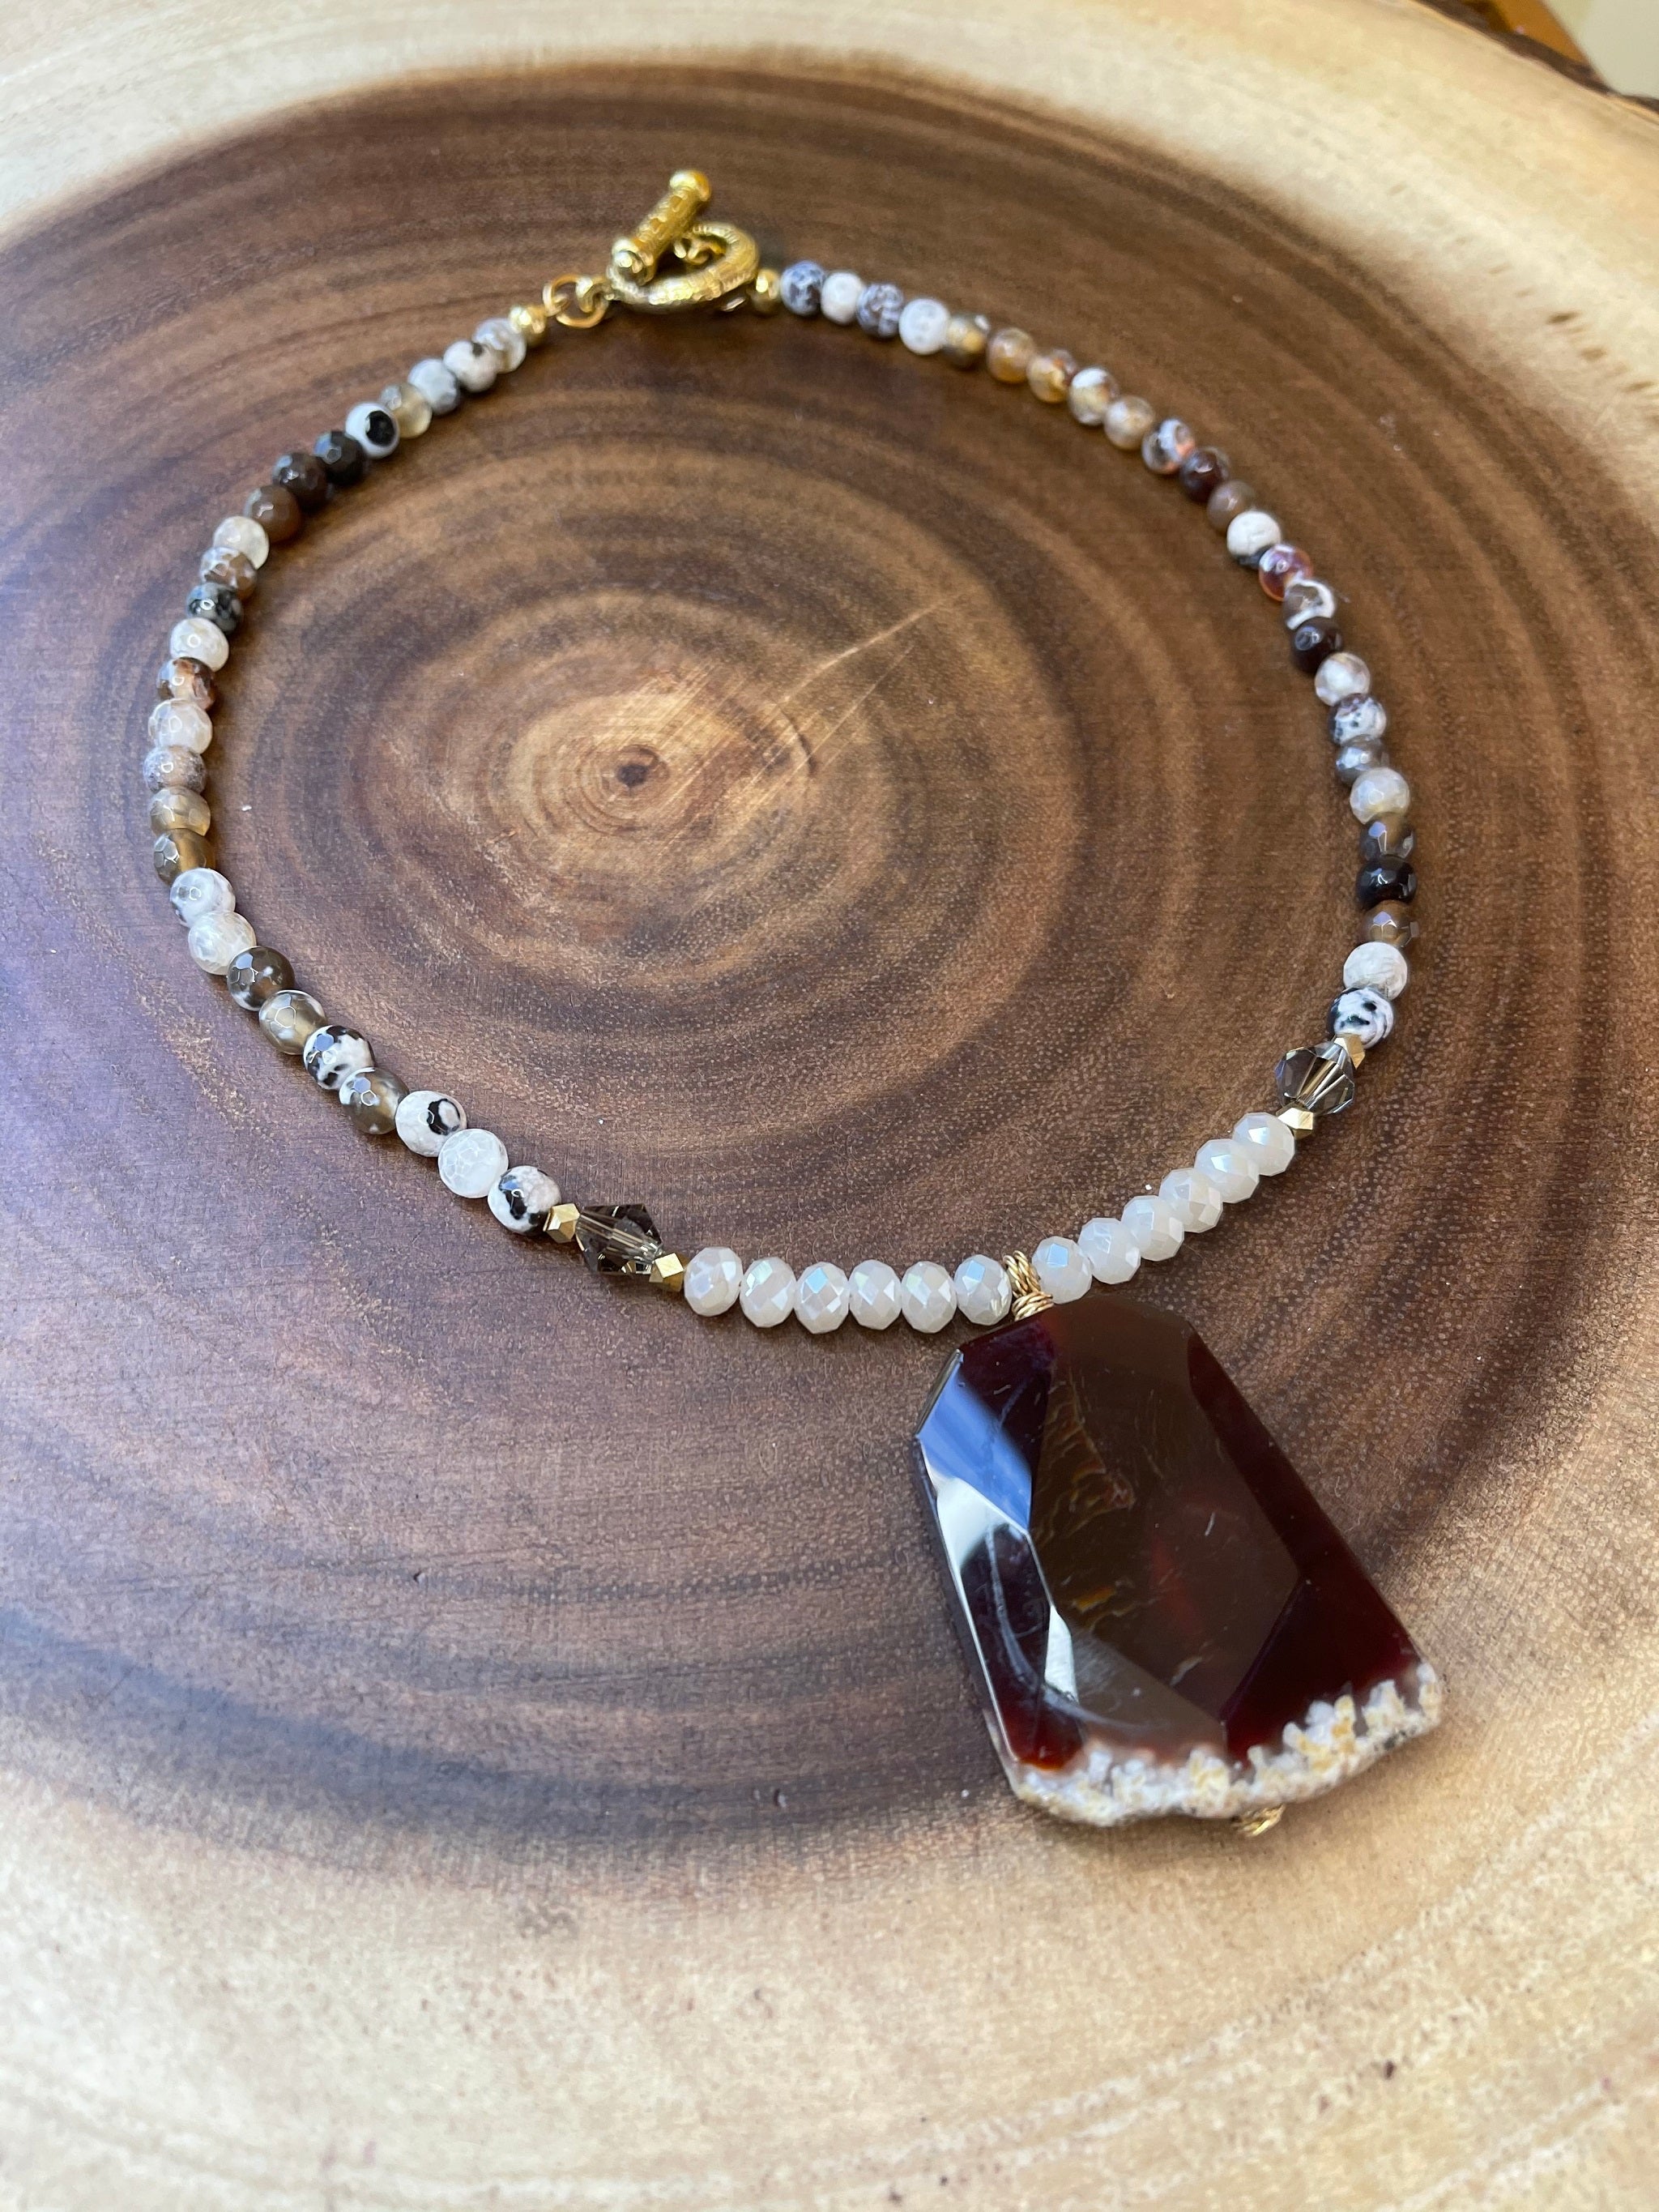 Botswana Brown Agate Necklace and Ring Jewelry Set